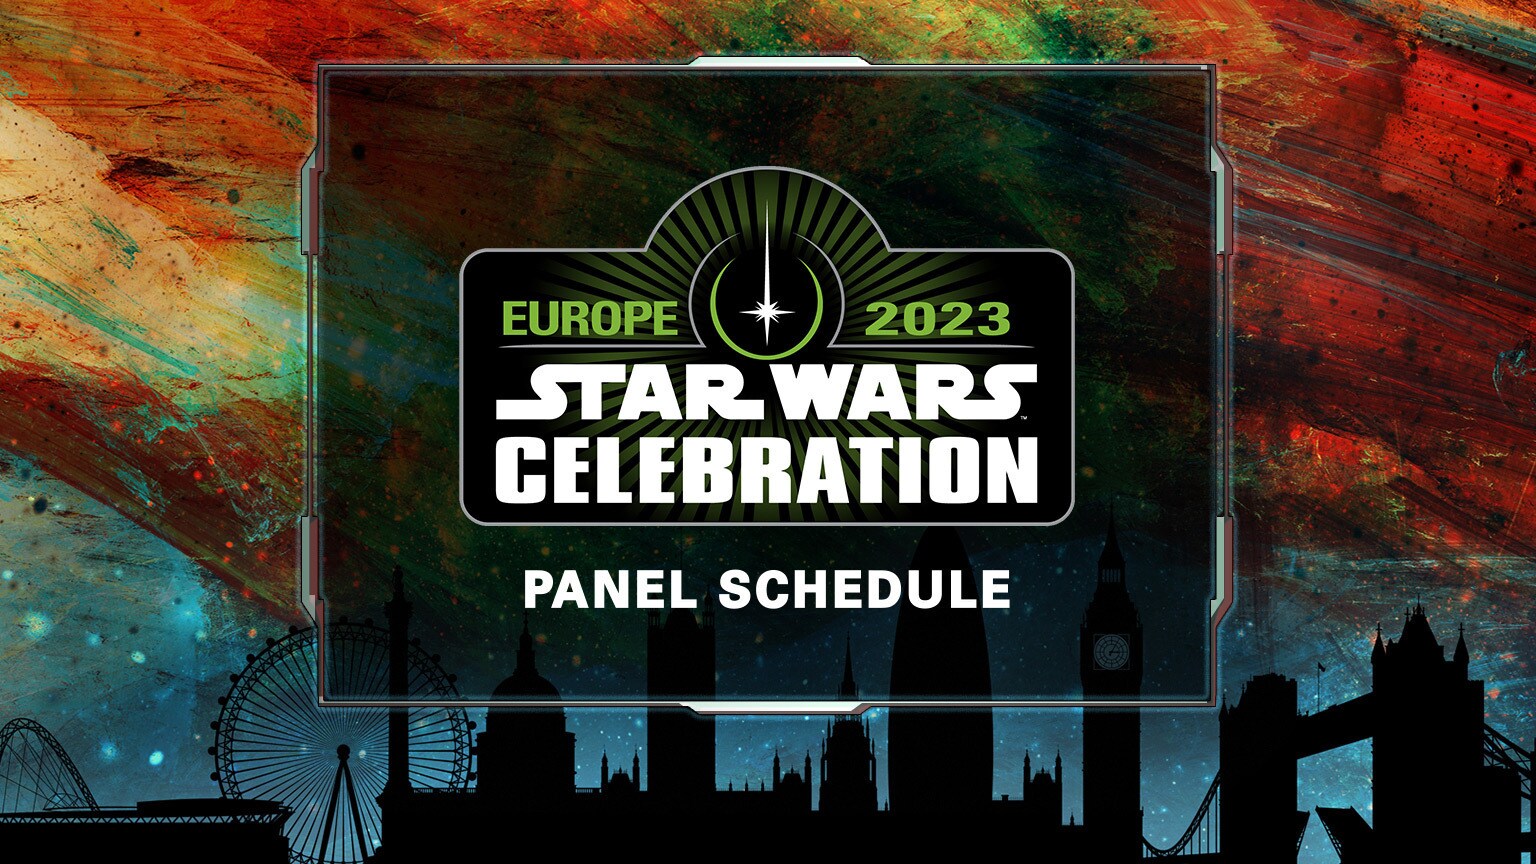 Plan Ahead with the Star Wars Celebration Europe 2023 Panel Schedule